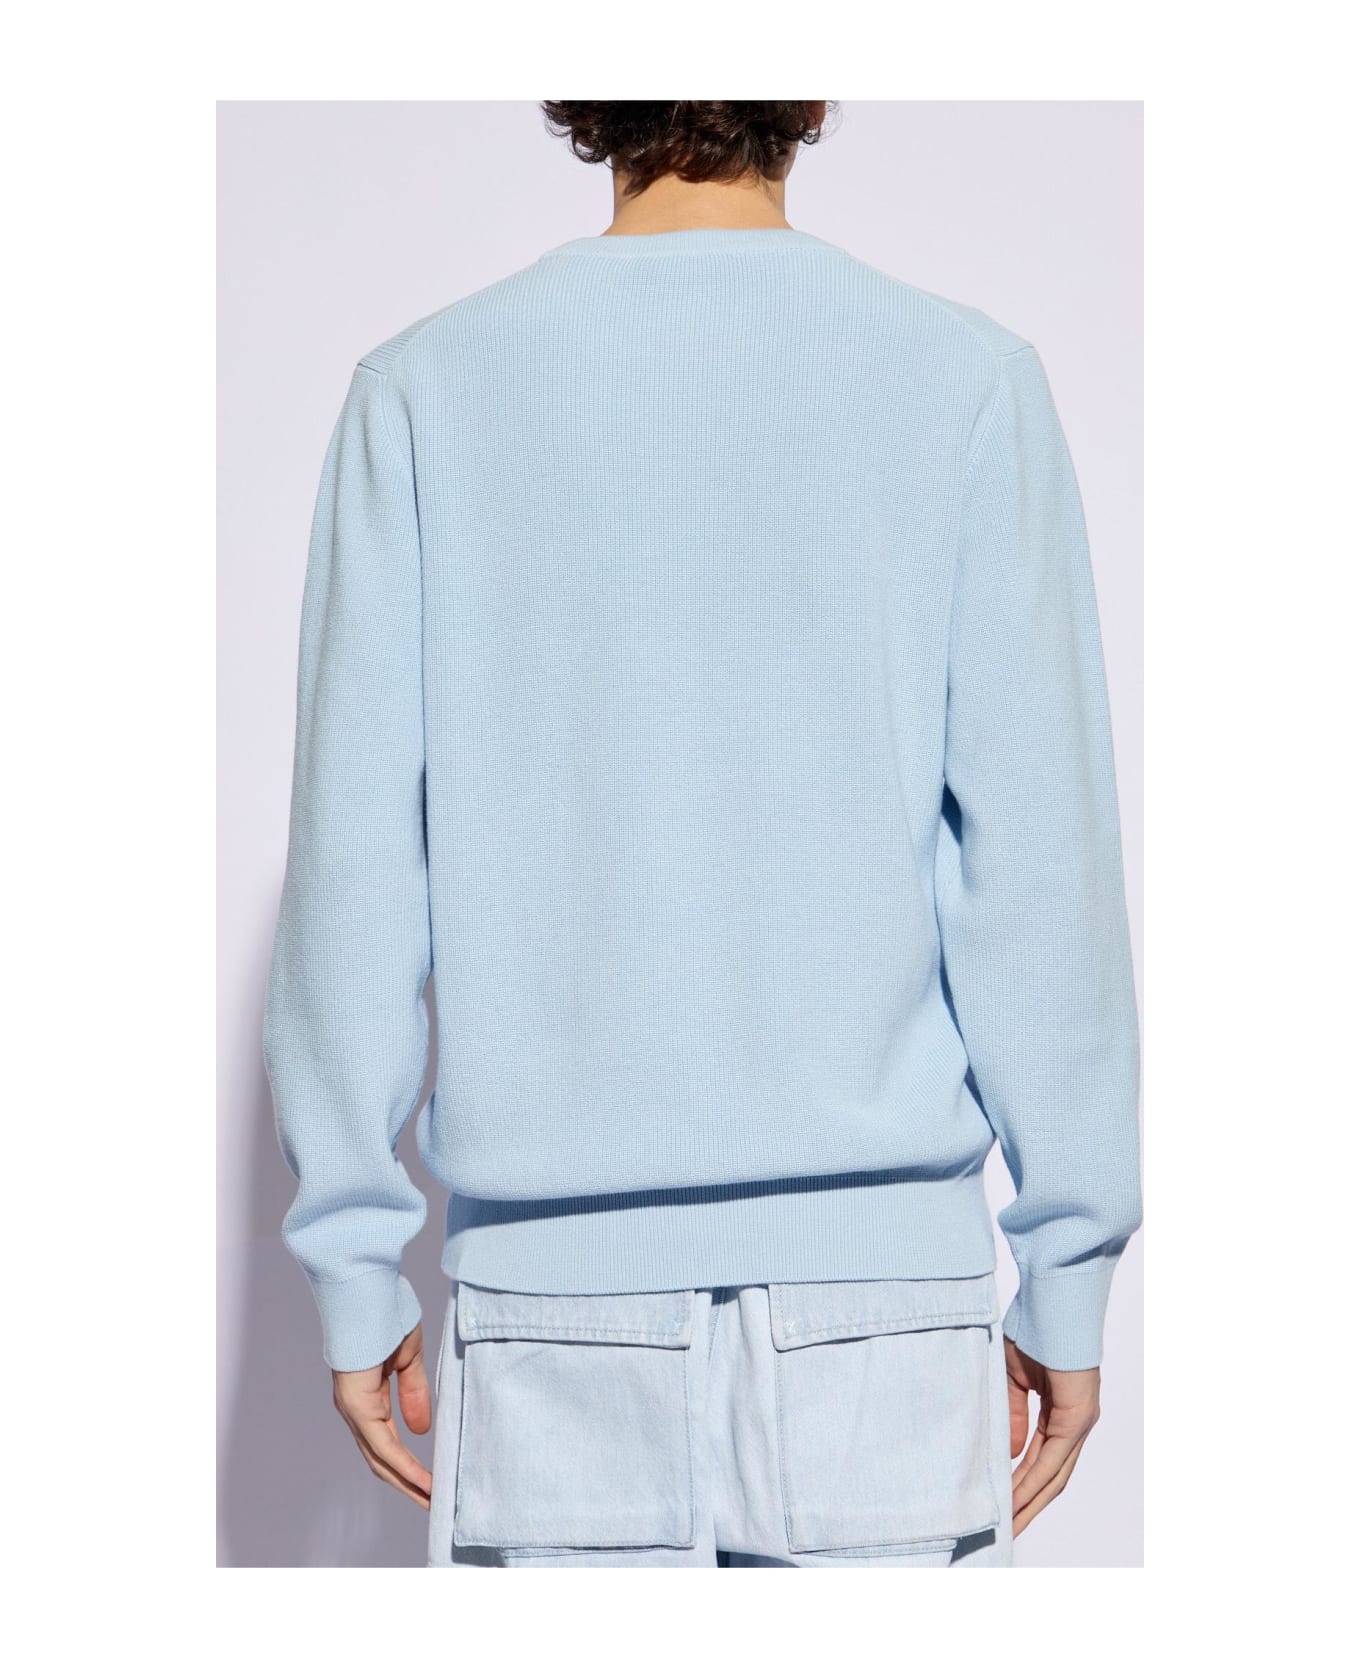 Versace Sweater With Logo - Pastel Blue